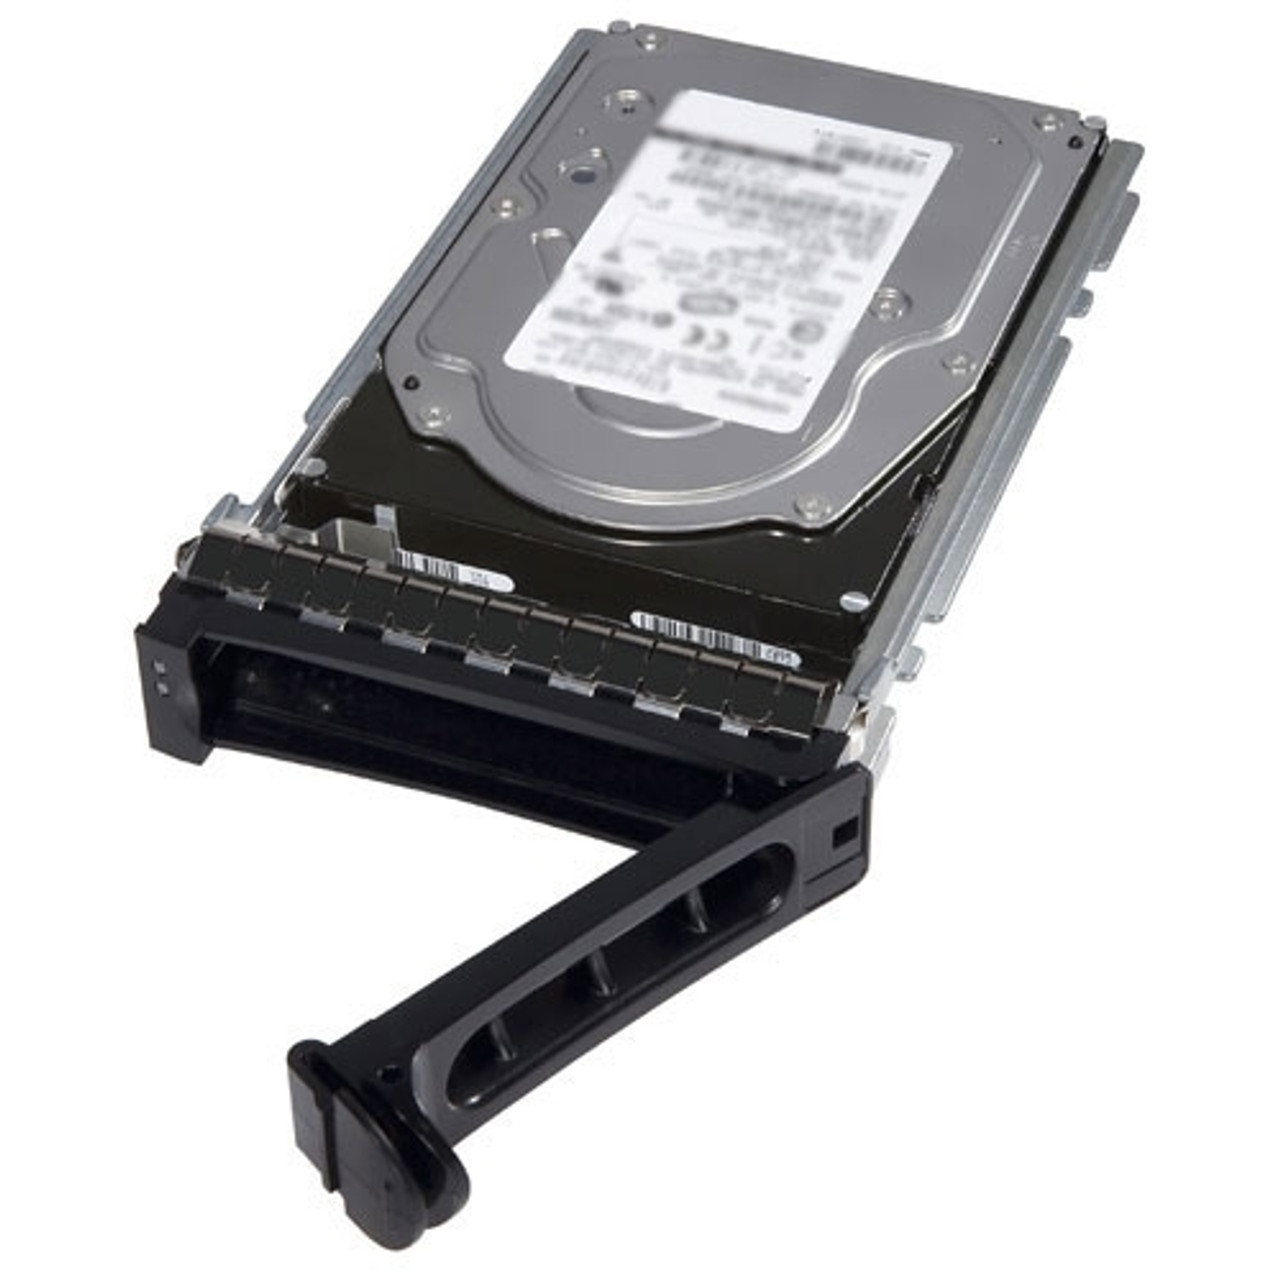 DELL GD084 73gb 10000rpm 80pin Ultra-320 Scsi 3.5inch Hot Pluggable Hard Disk Drive With Tray